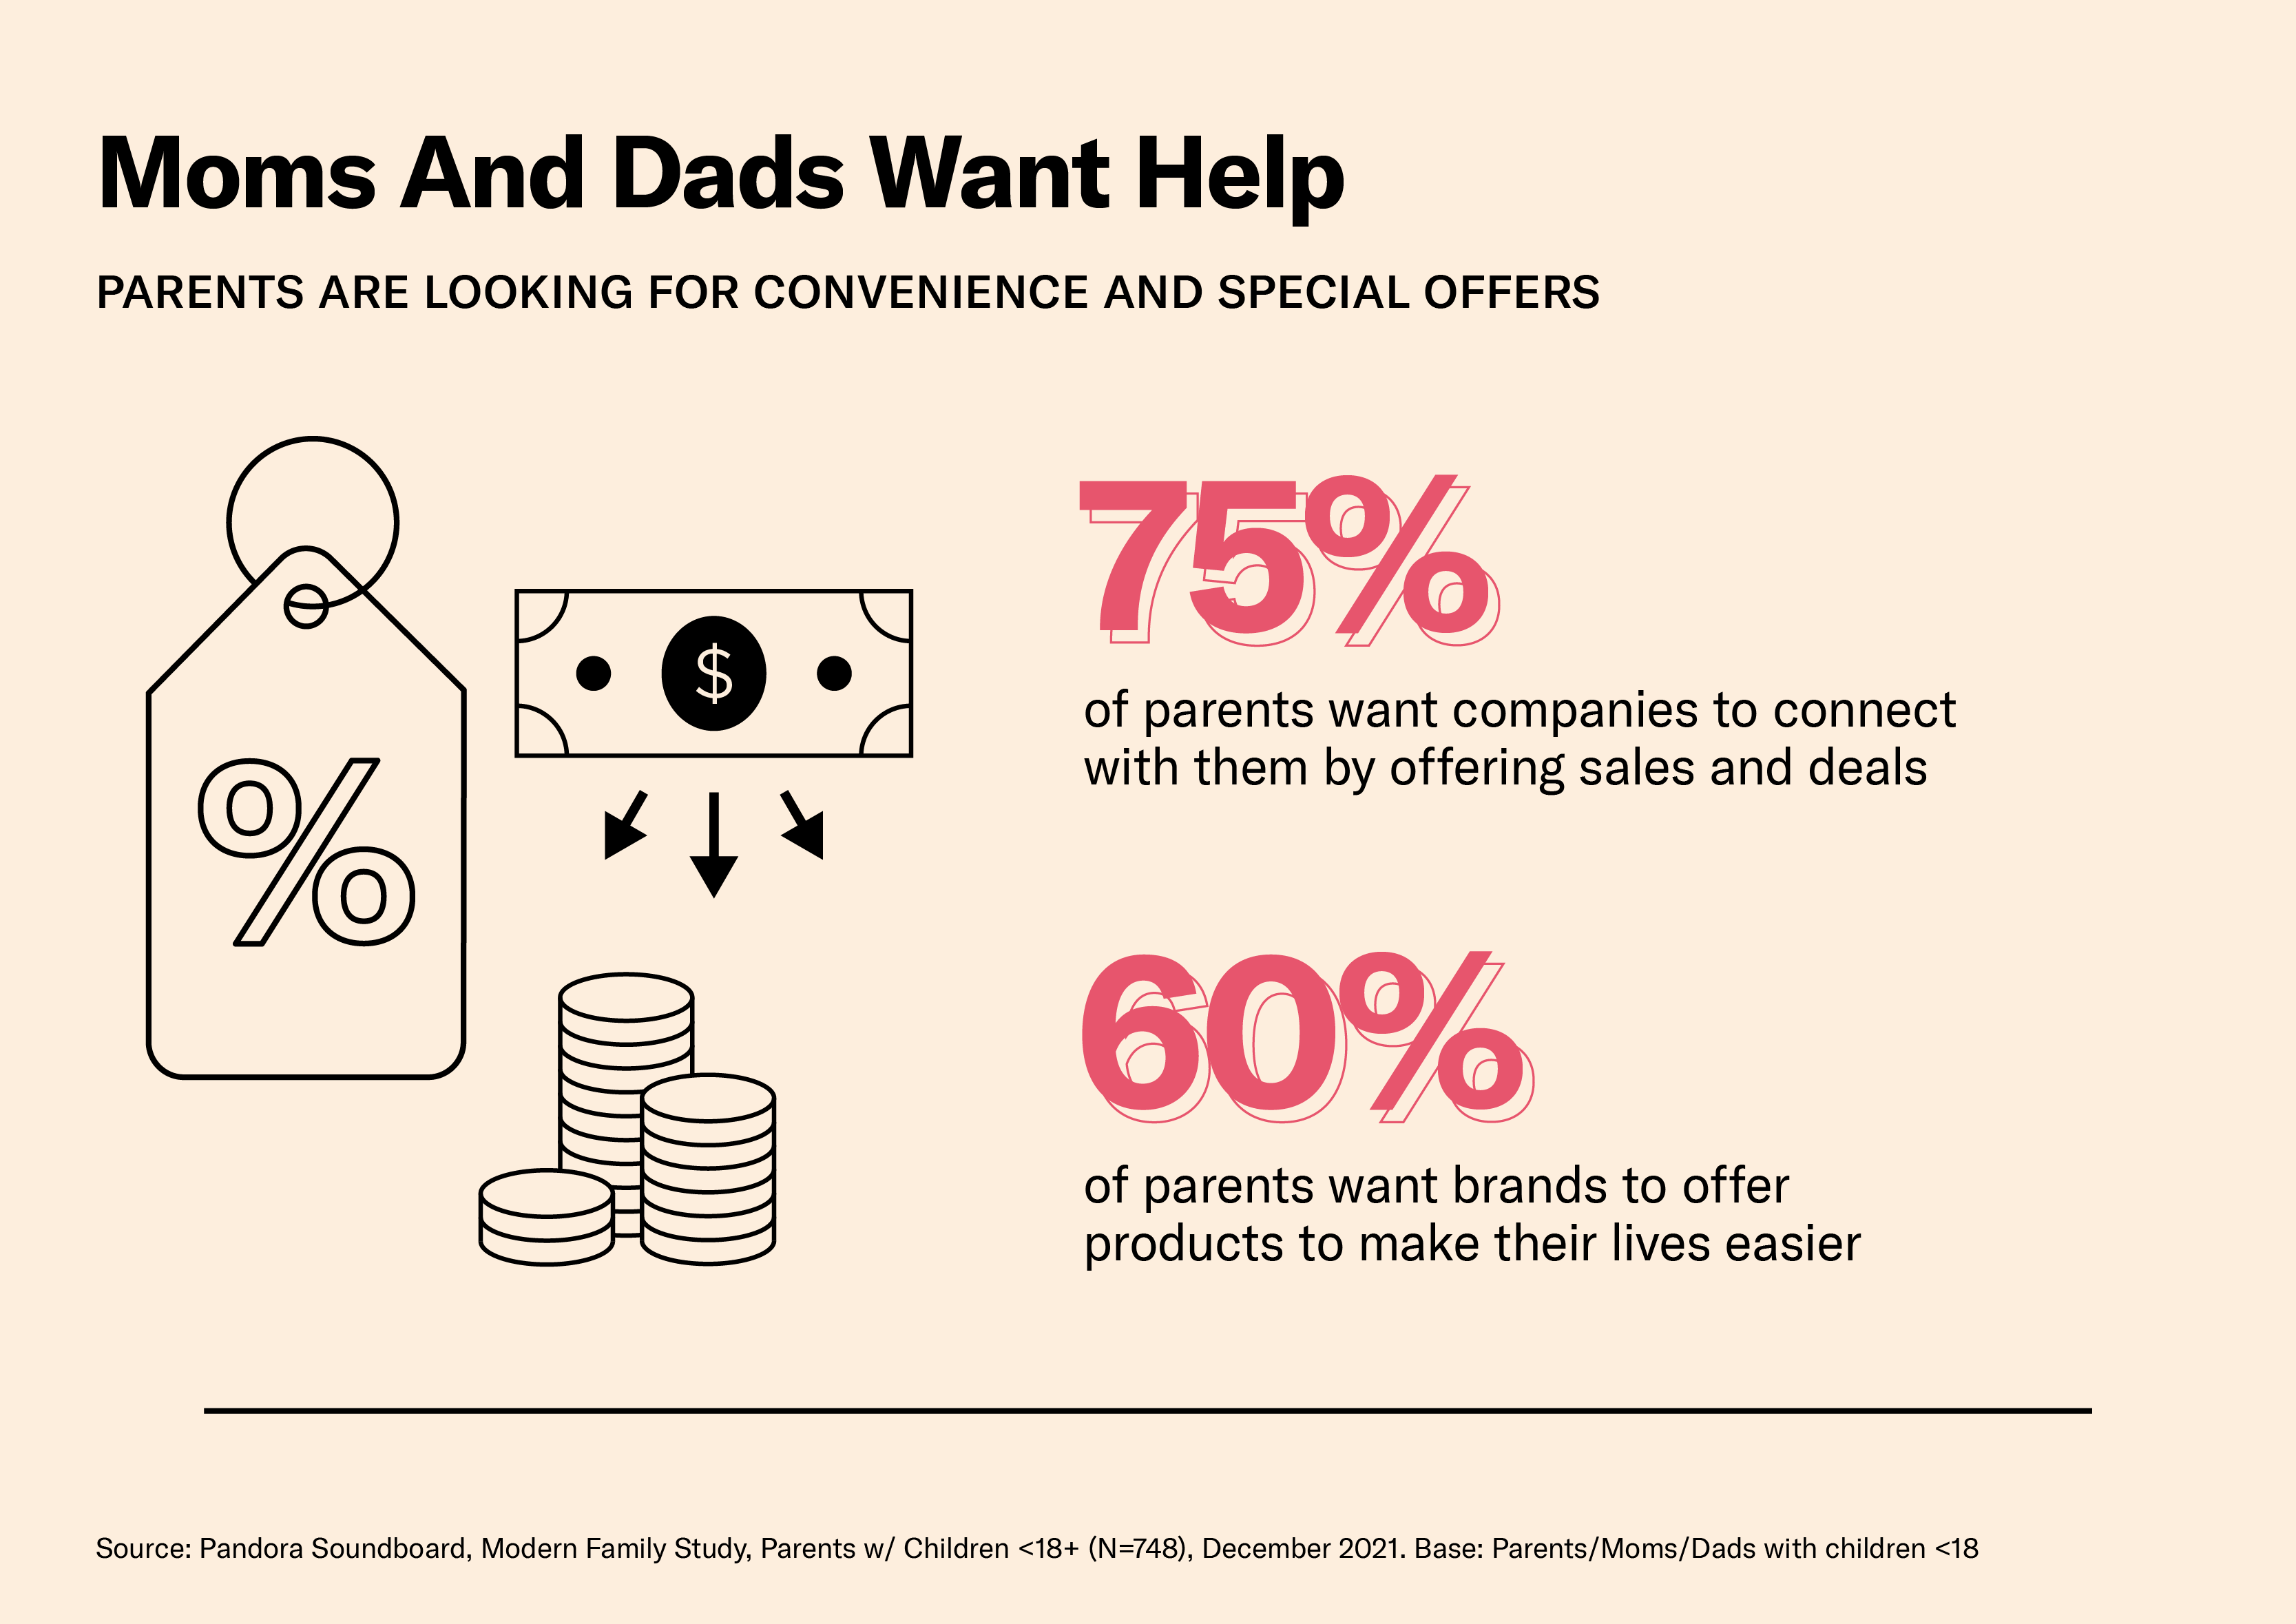 Parents want help and deals from brands